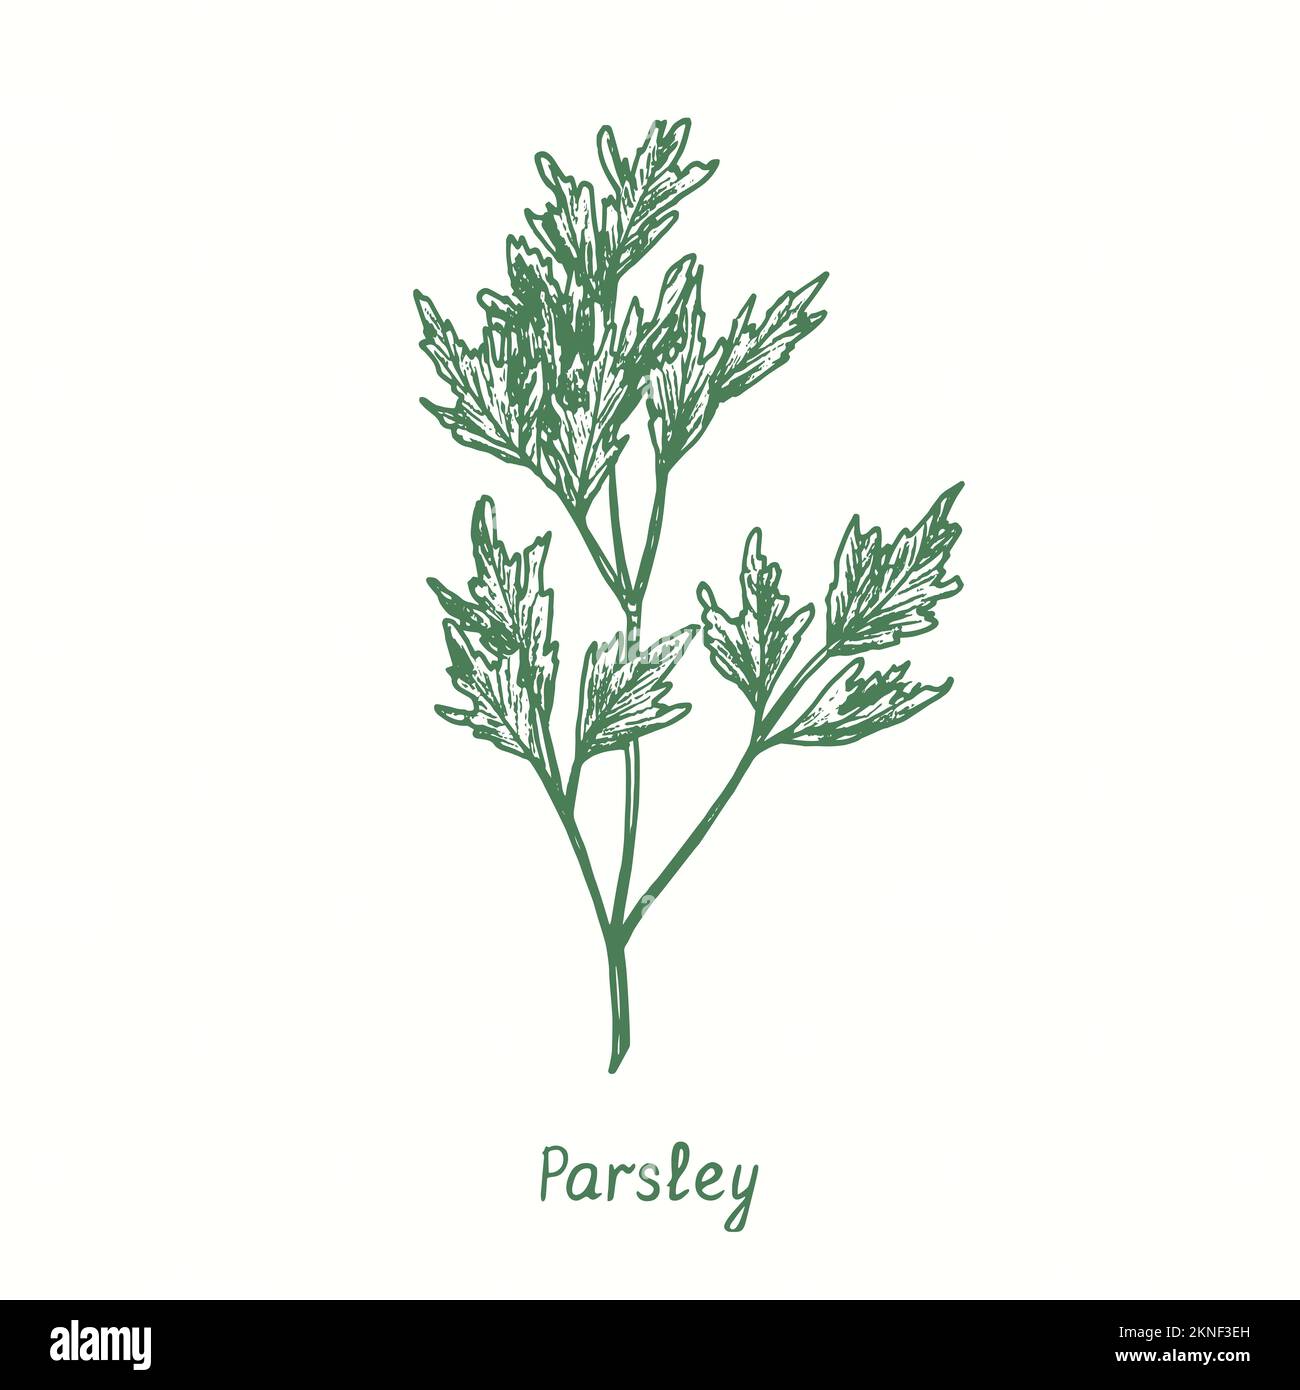 Parsley green twig.  Ink black and white doodle drawing in woodcut style Stock Photo